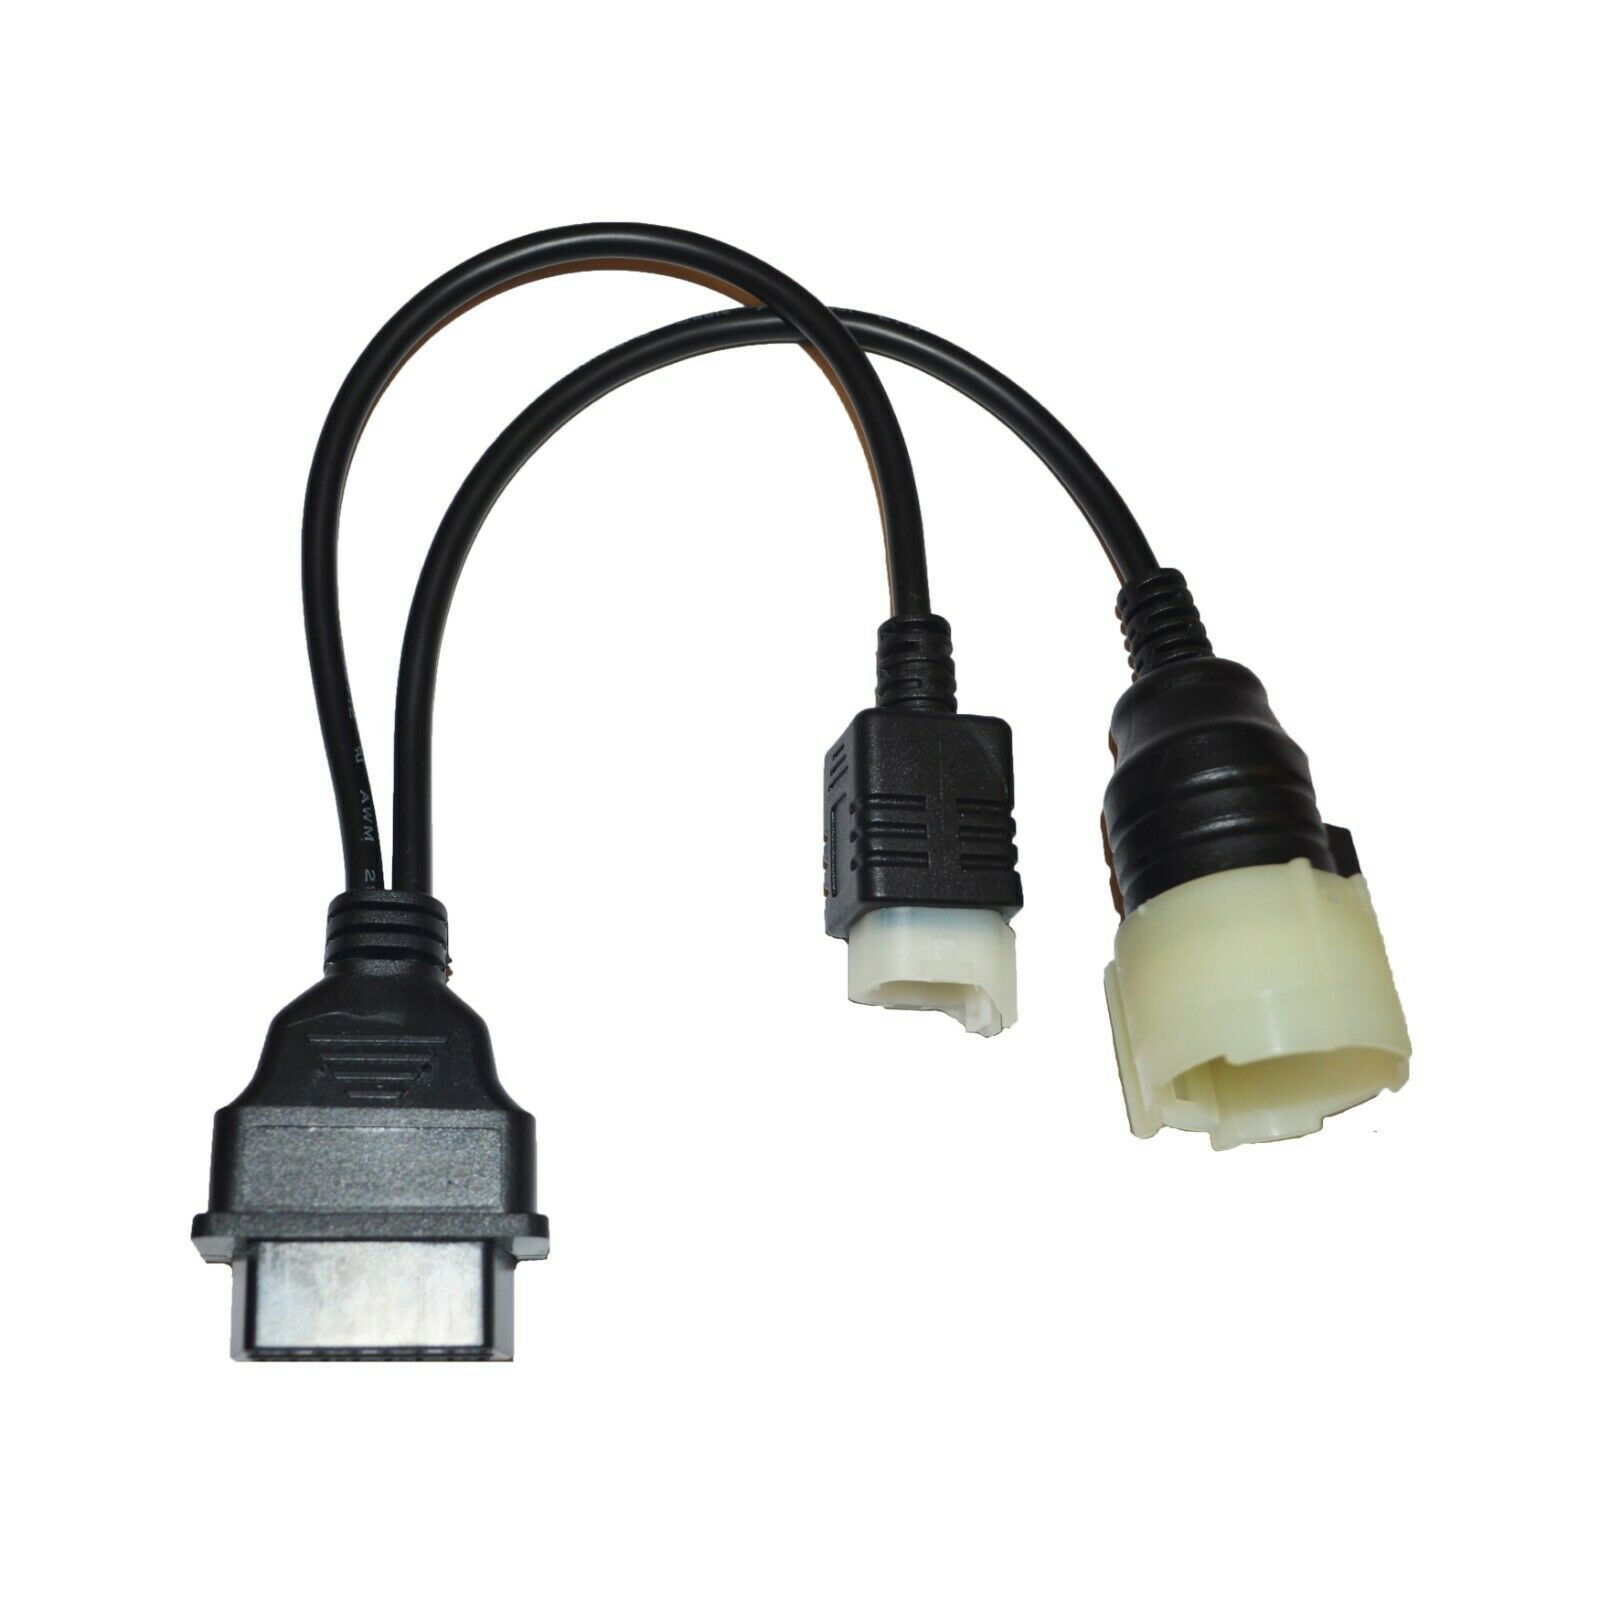 Diagnostic USB Cable Kit For Suzuki SDS Version 8.40 Outboard Boat Marine Covers ALL models from 1999 up to 2020